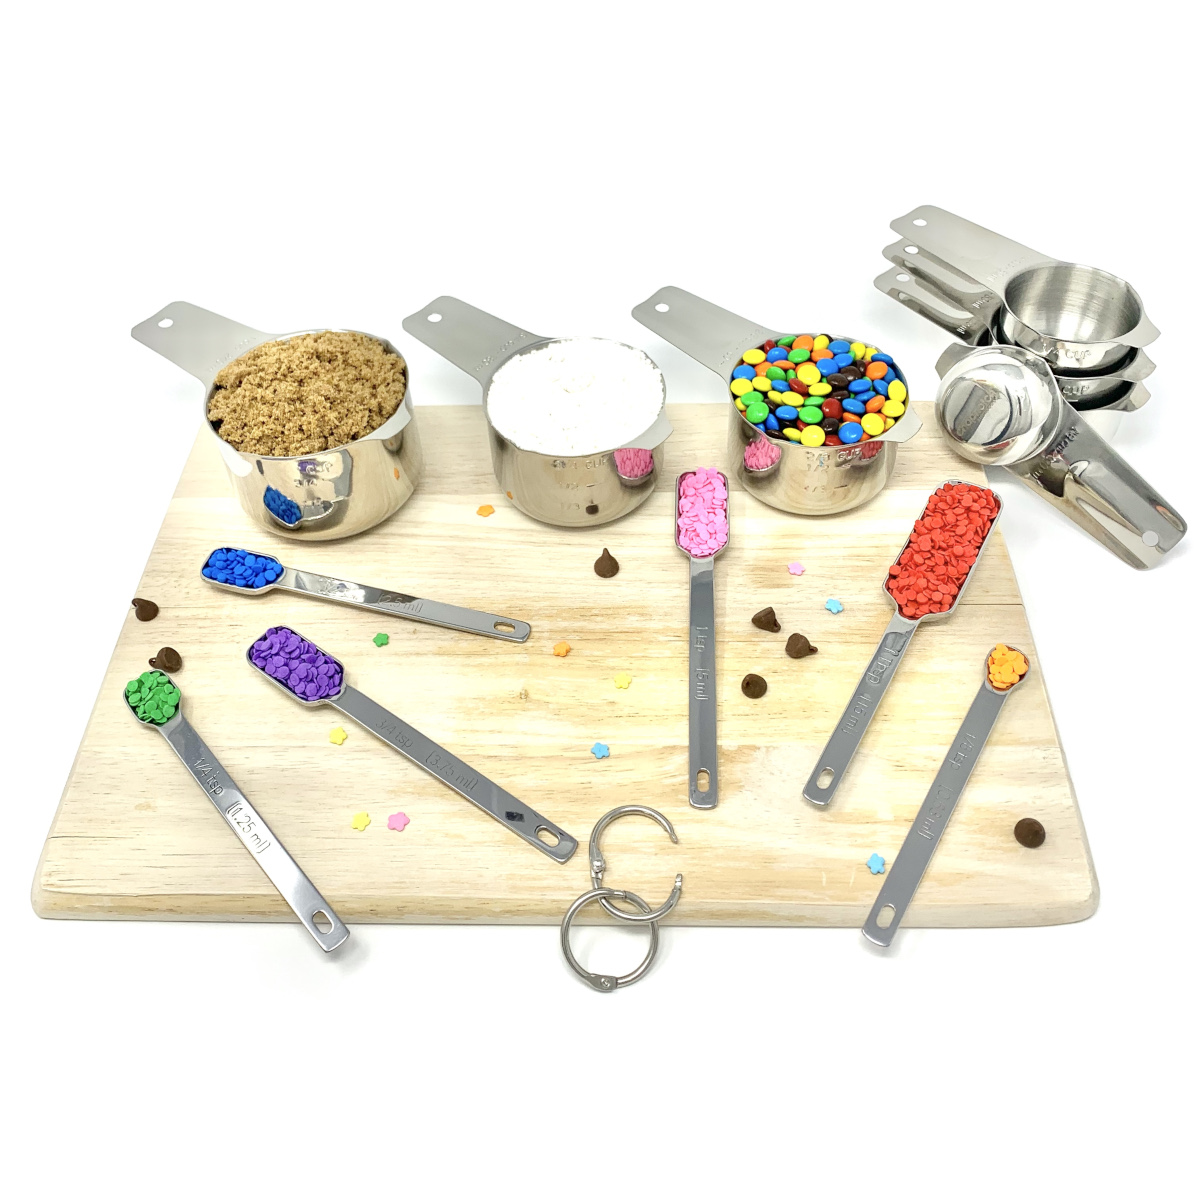 The complete measuring set on a cutting board with baking ingredients.